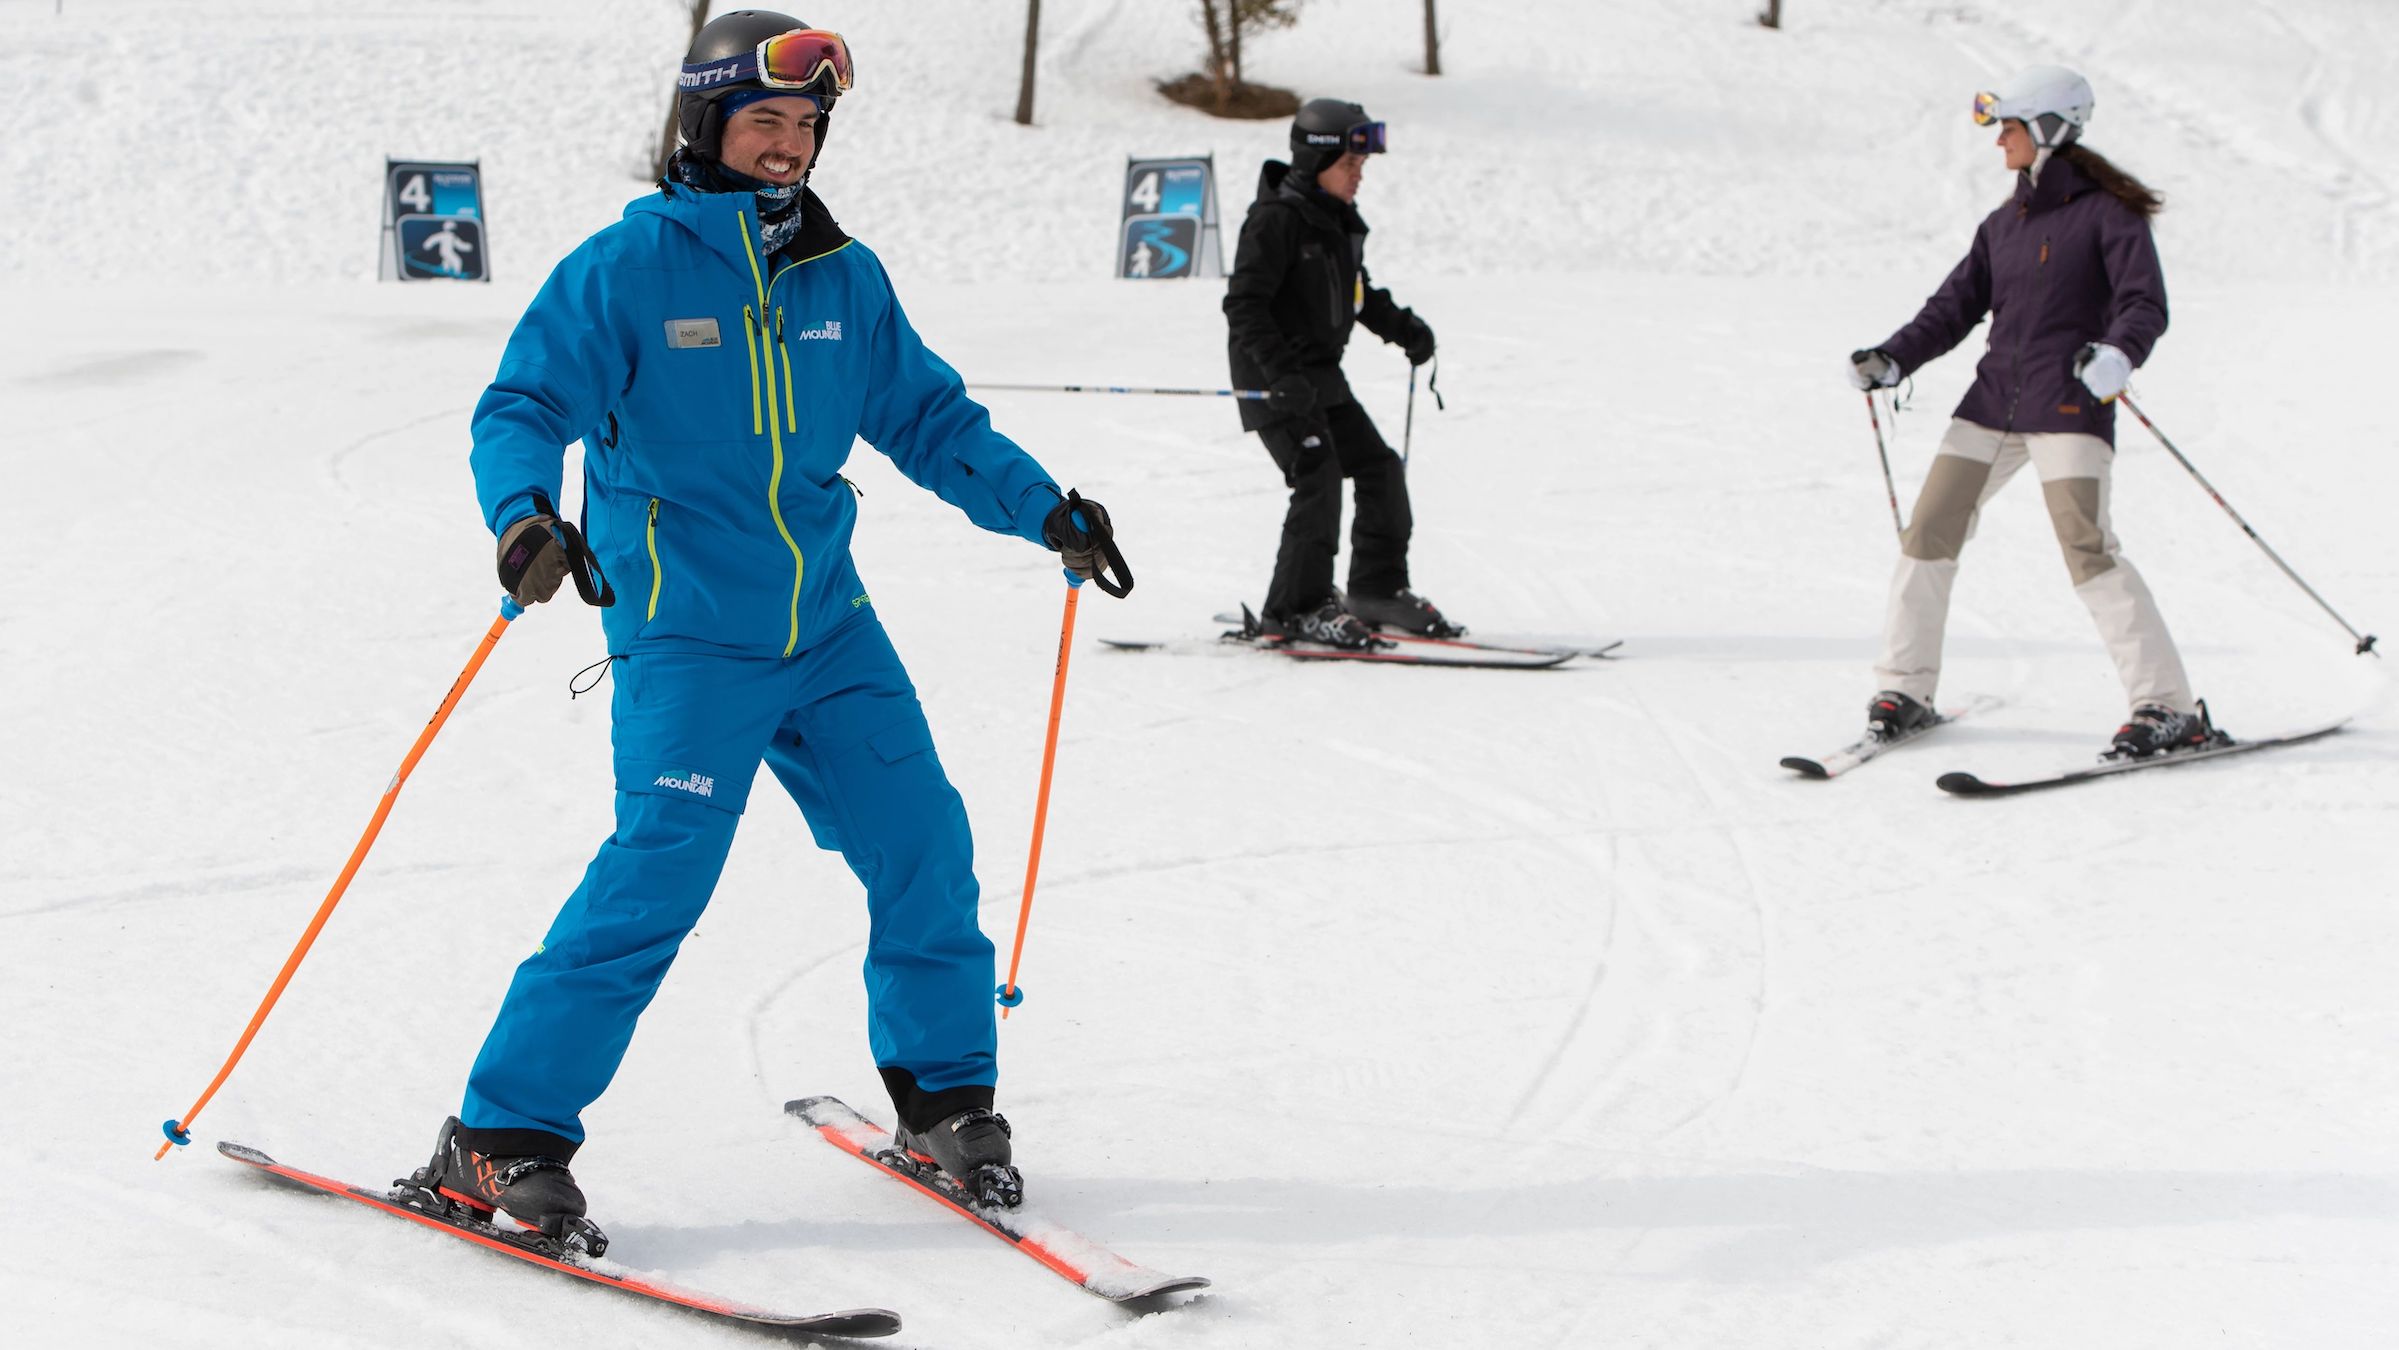 New skier with instructor during Private Ski Lessons at Blue Mountain